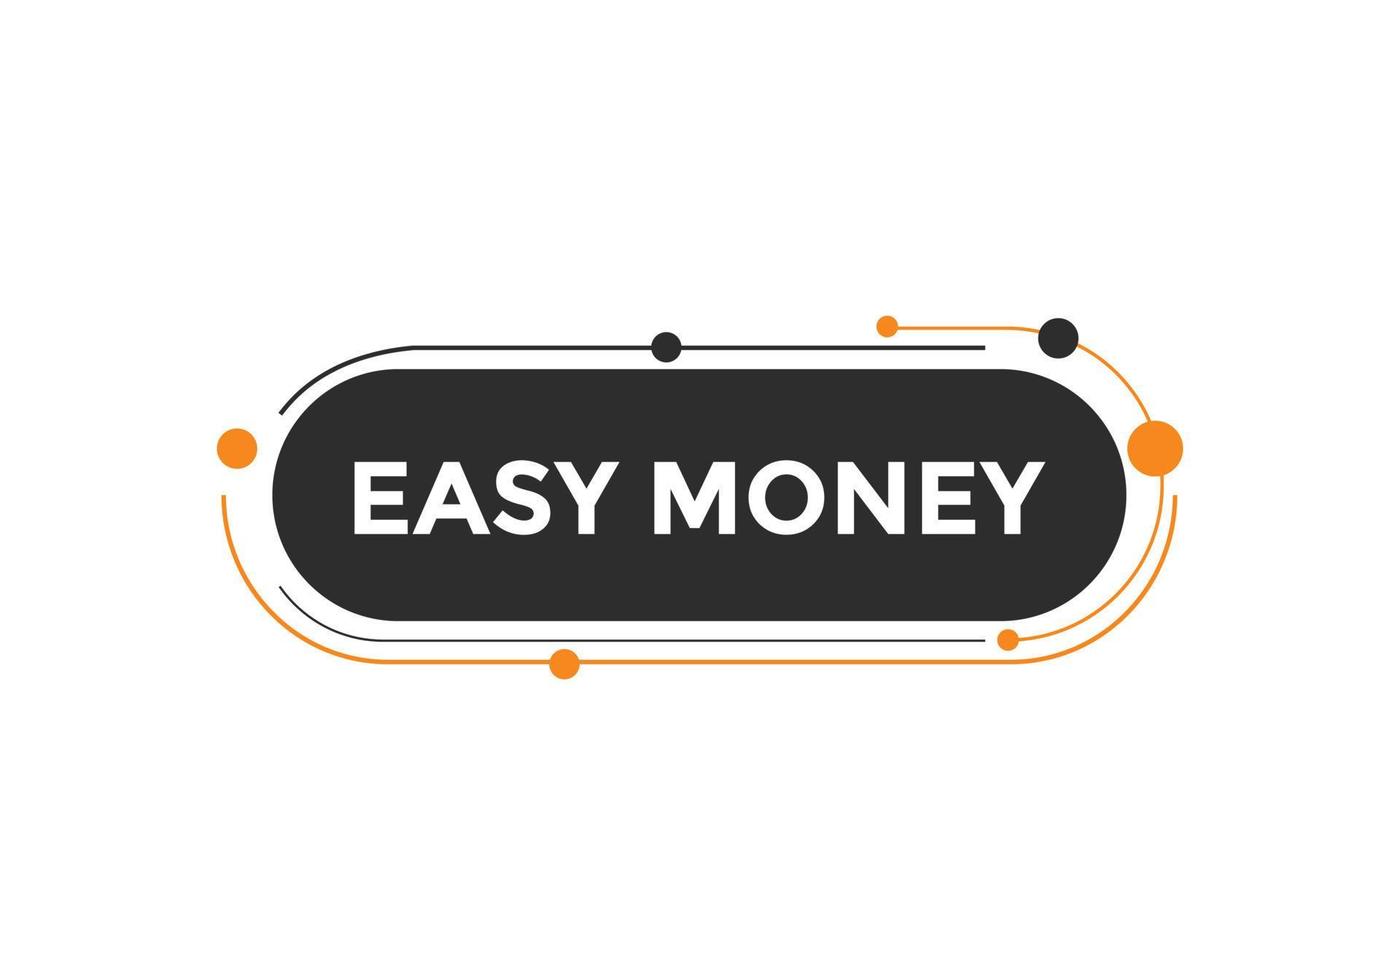 Easy money button. Easy money Colorful label sign template. speech bubble. vector